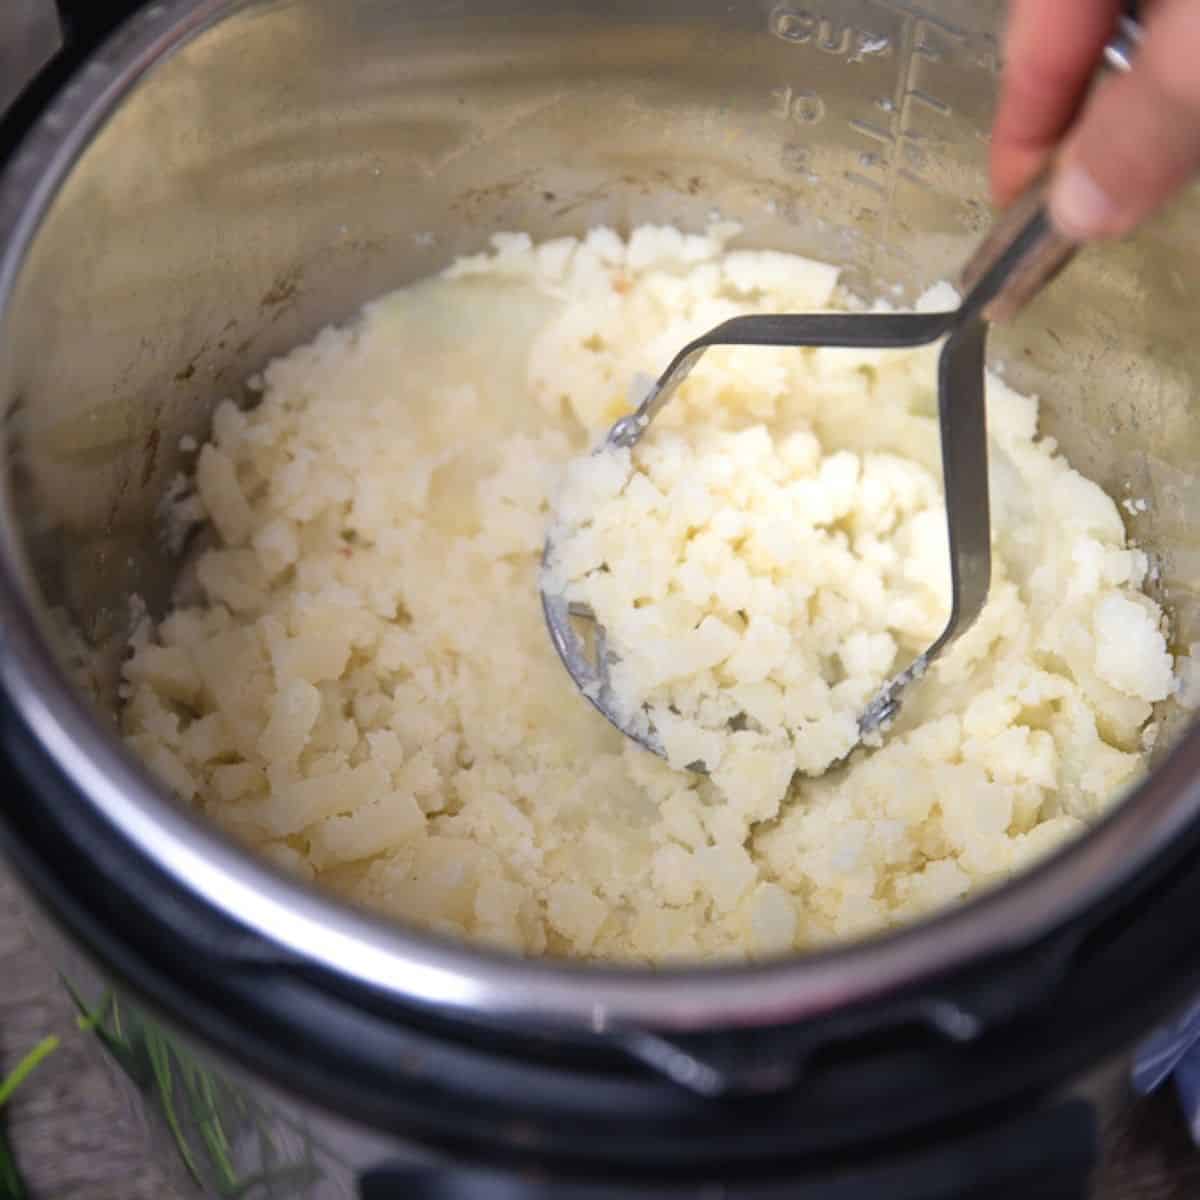 Potato Masher Mashing Up Cooked Potatoes in Instant Pot.